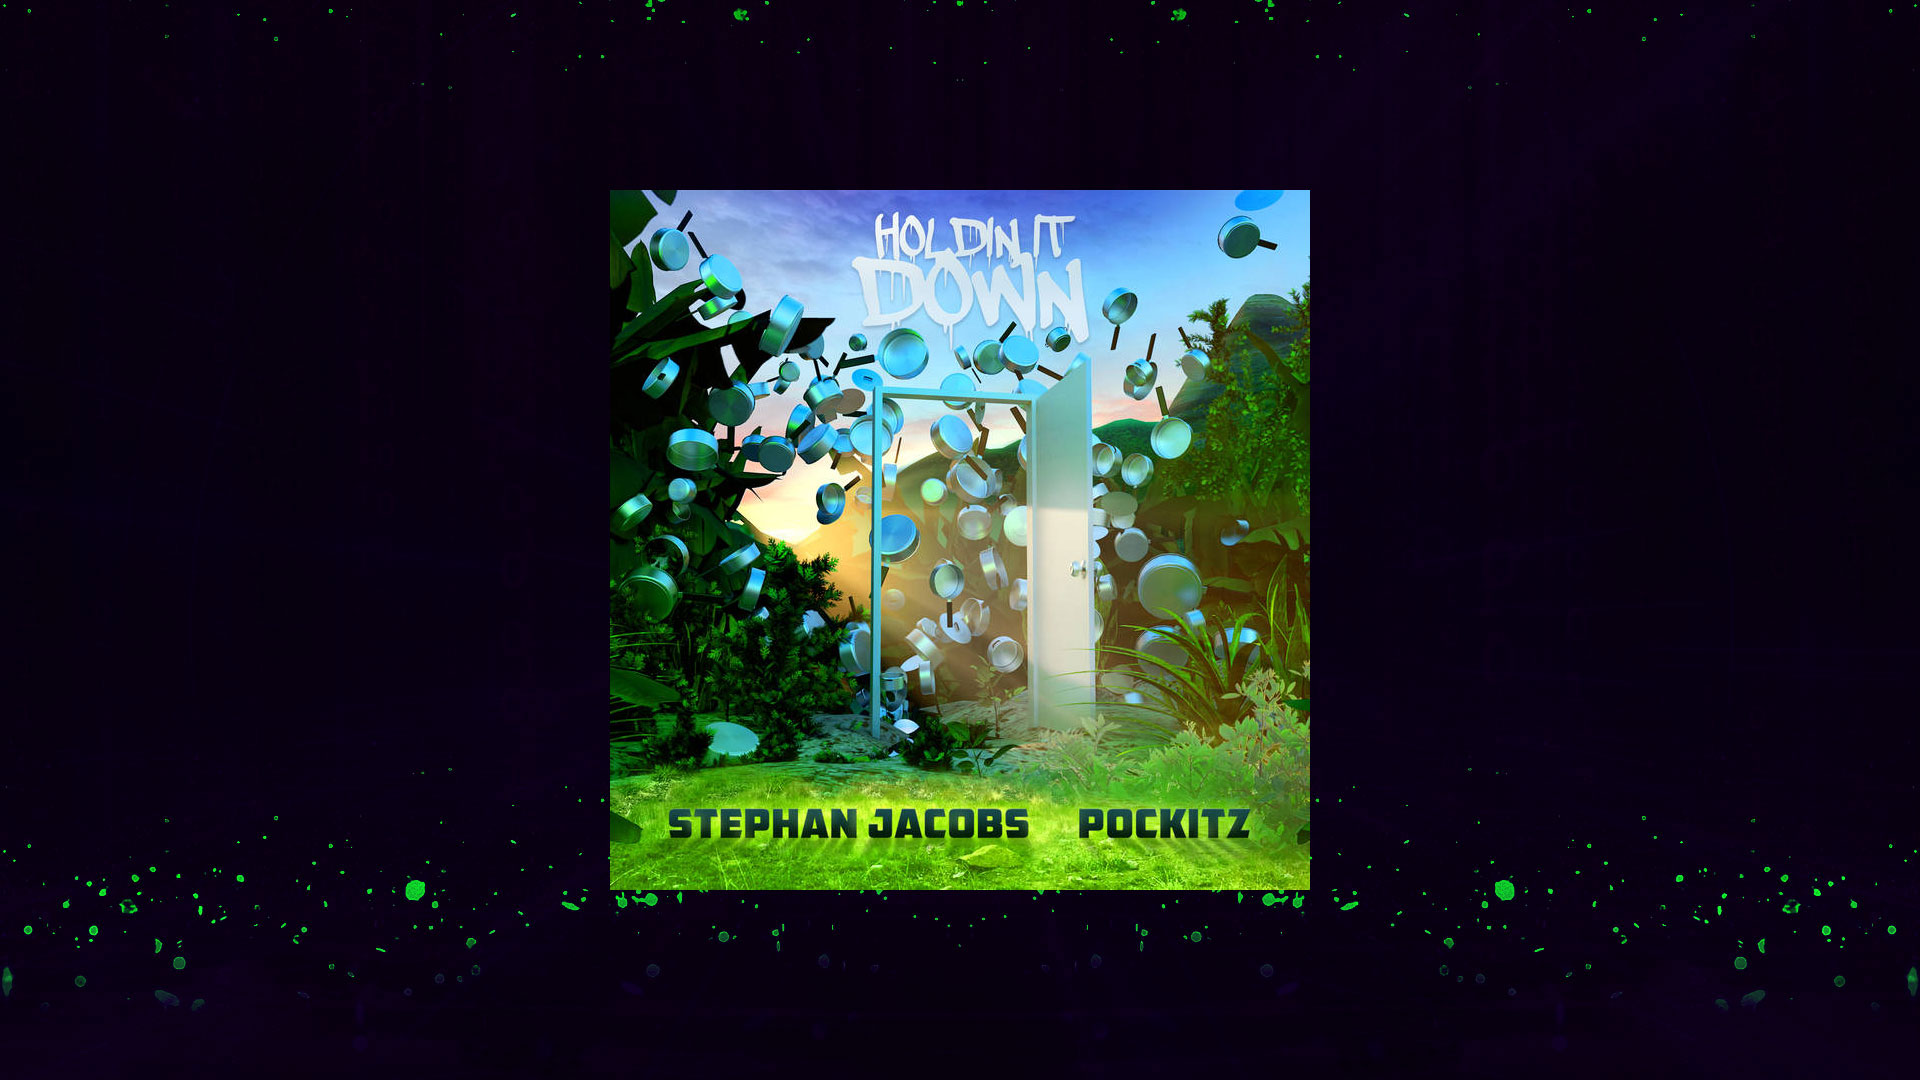 New EDM Music release Stephan Jacobs and Pockitz